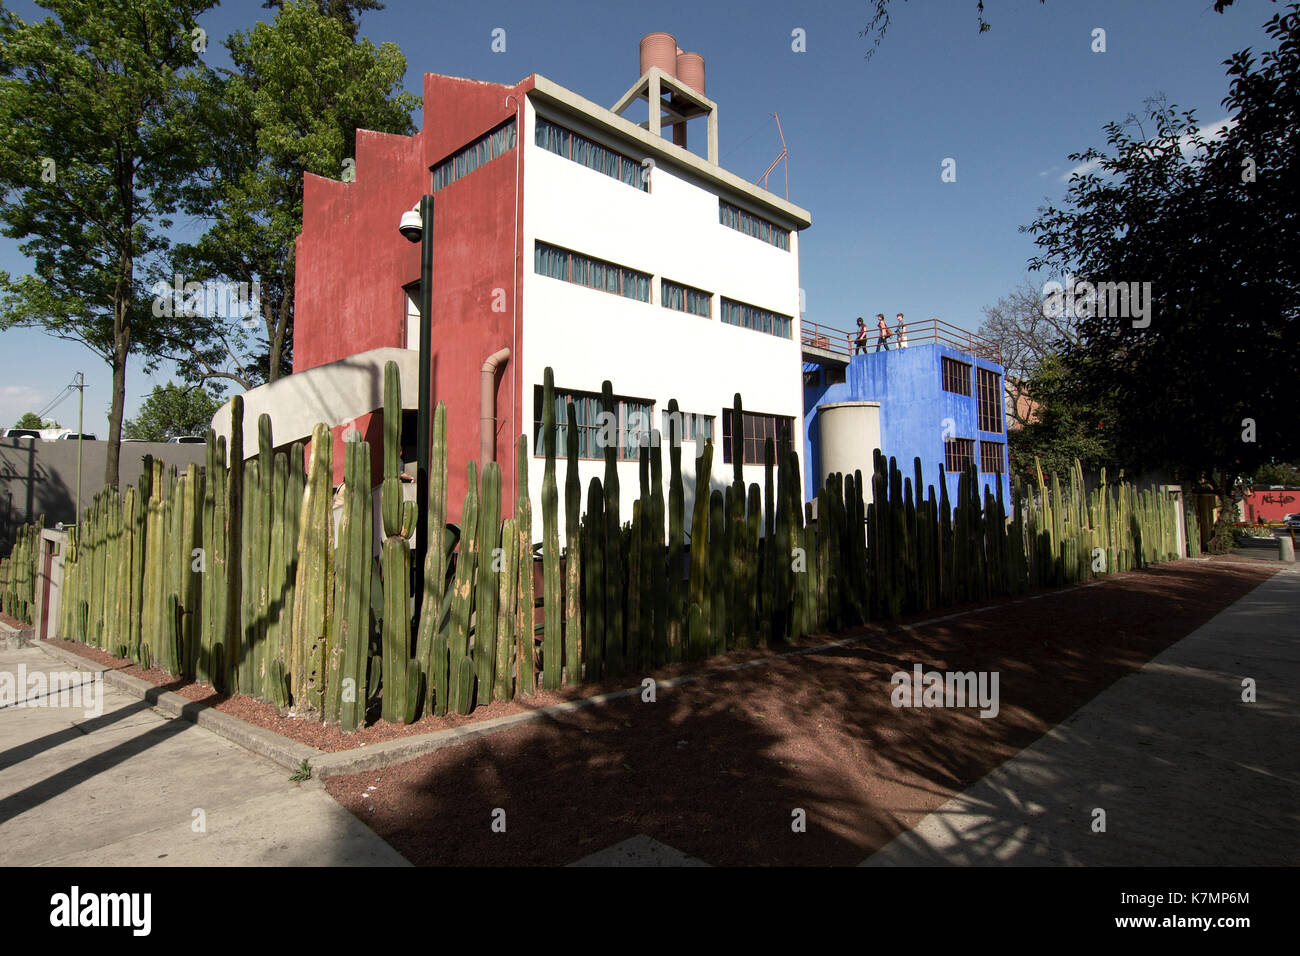 Mexico City, Mexico - 2013: House Studio Museum of Diego Rivera and Frida Kahlo, located in San Angel. Architect: Juan O'Gorman. Stock Photo